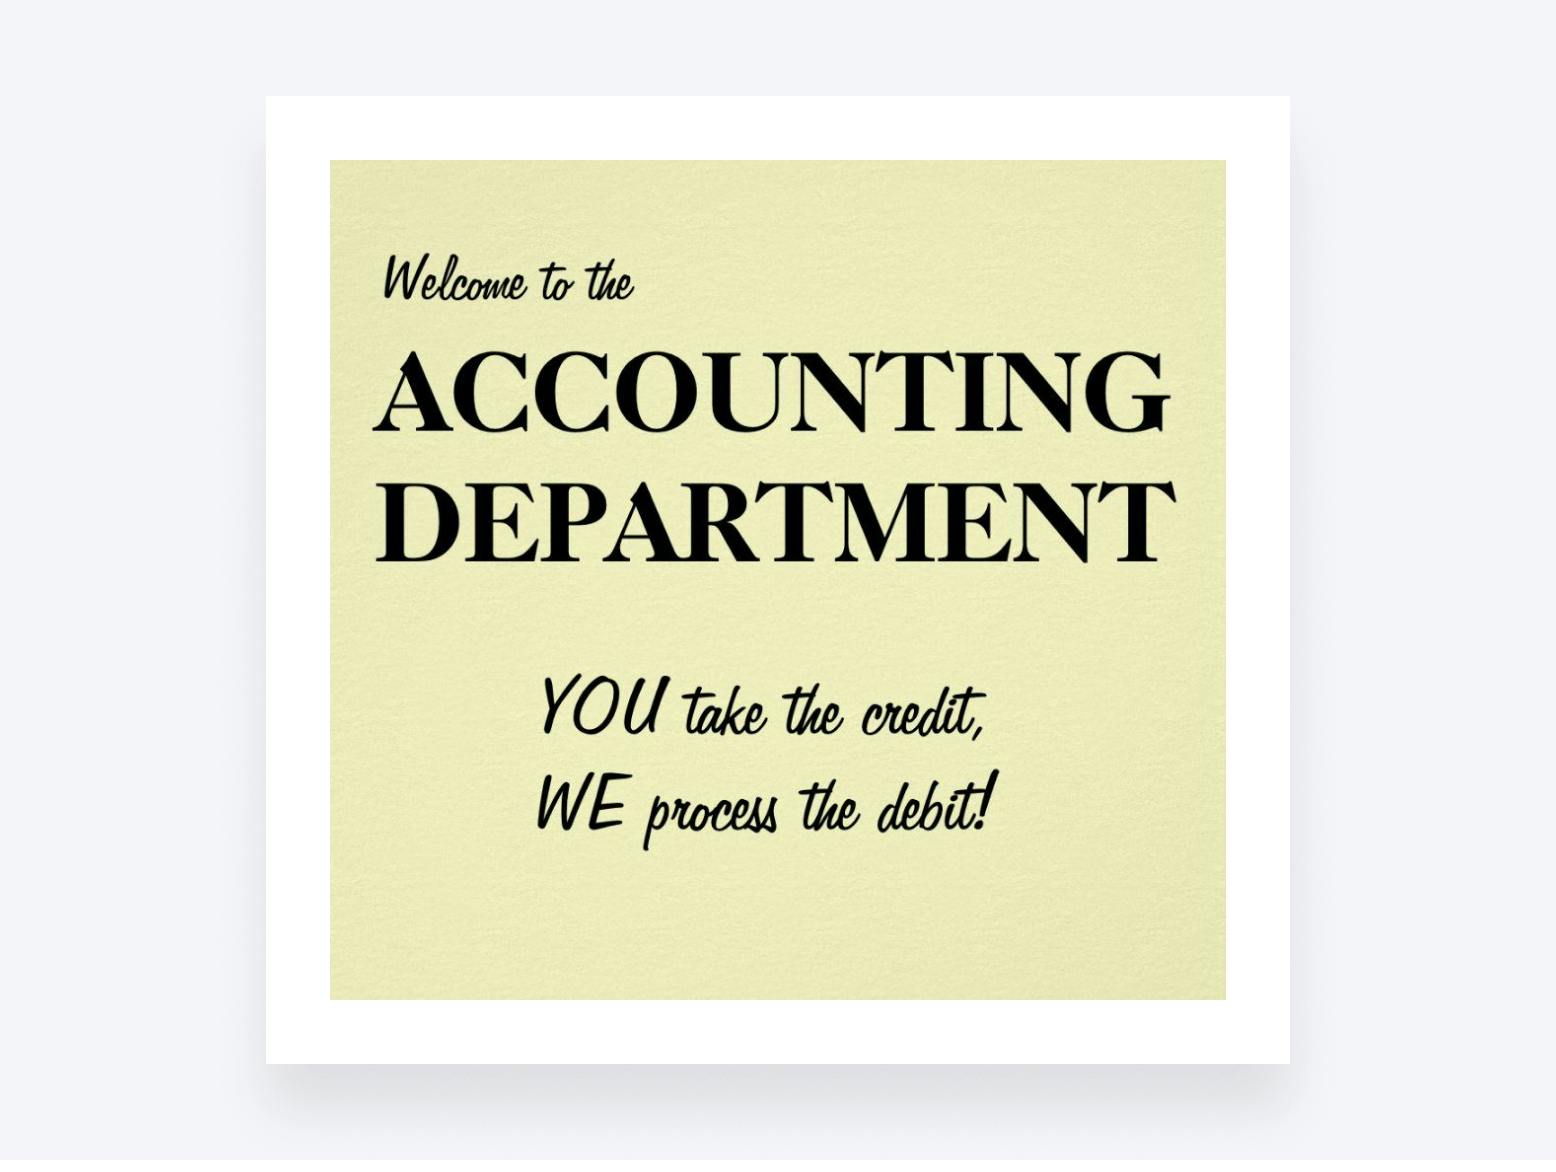 Accounting meme summing up exactly how the accounting department works